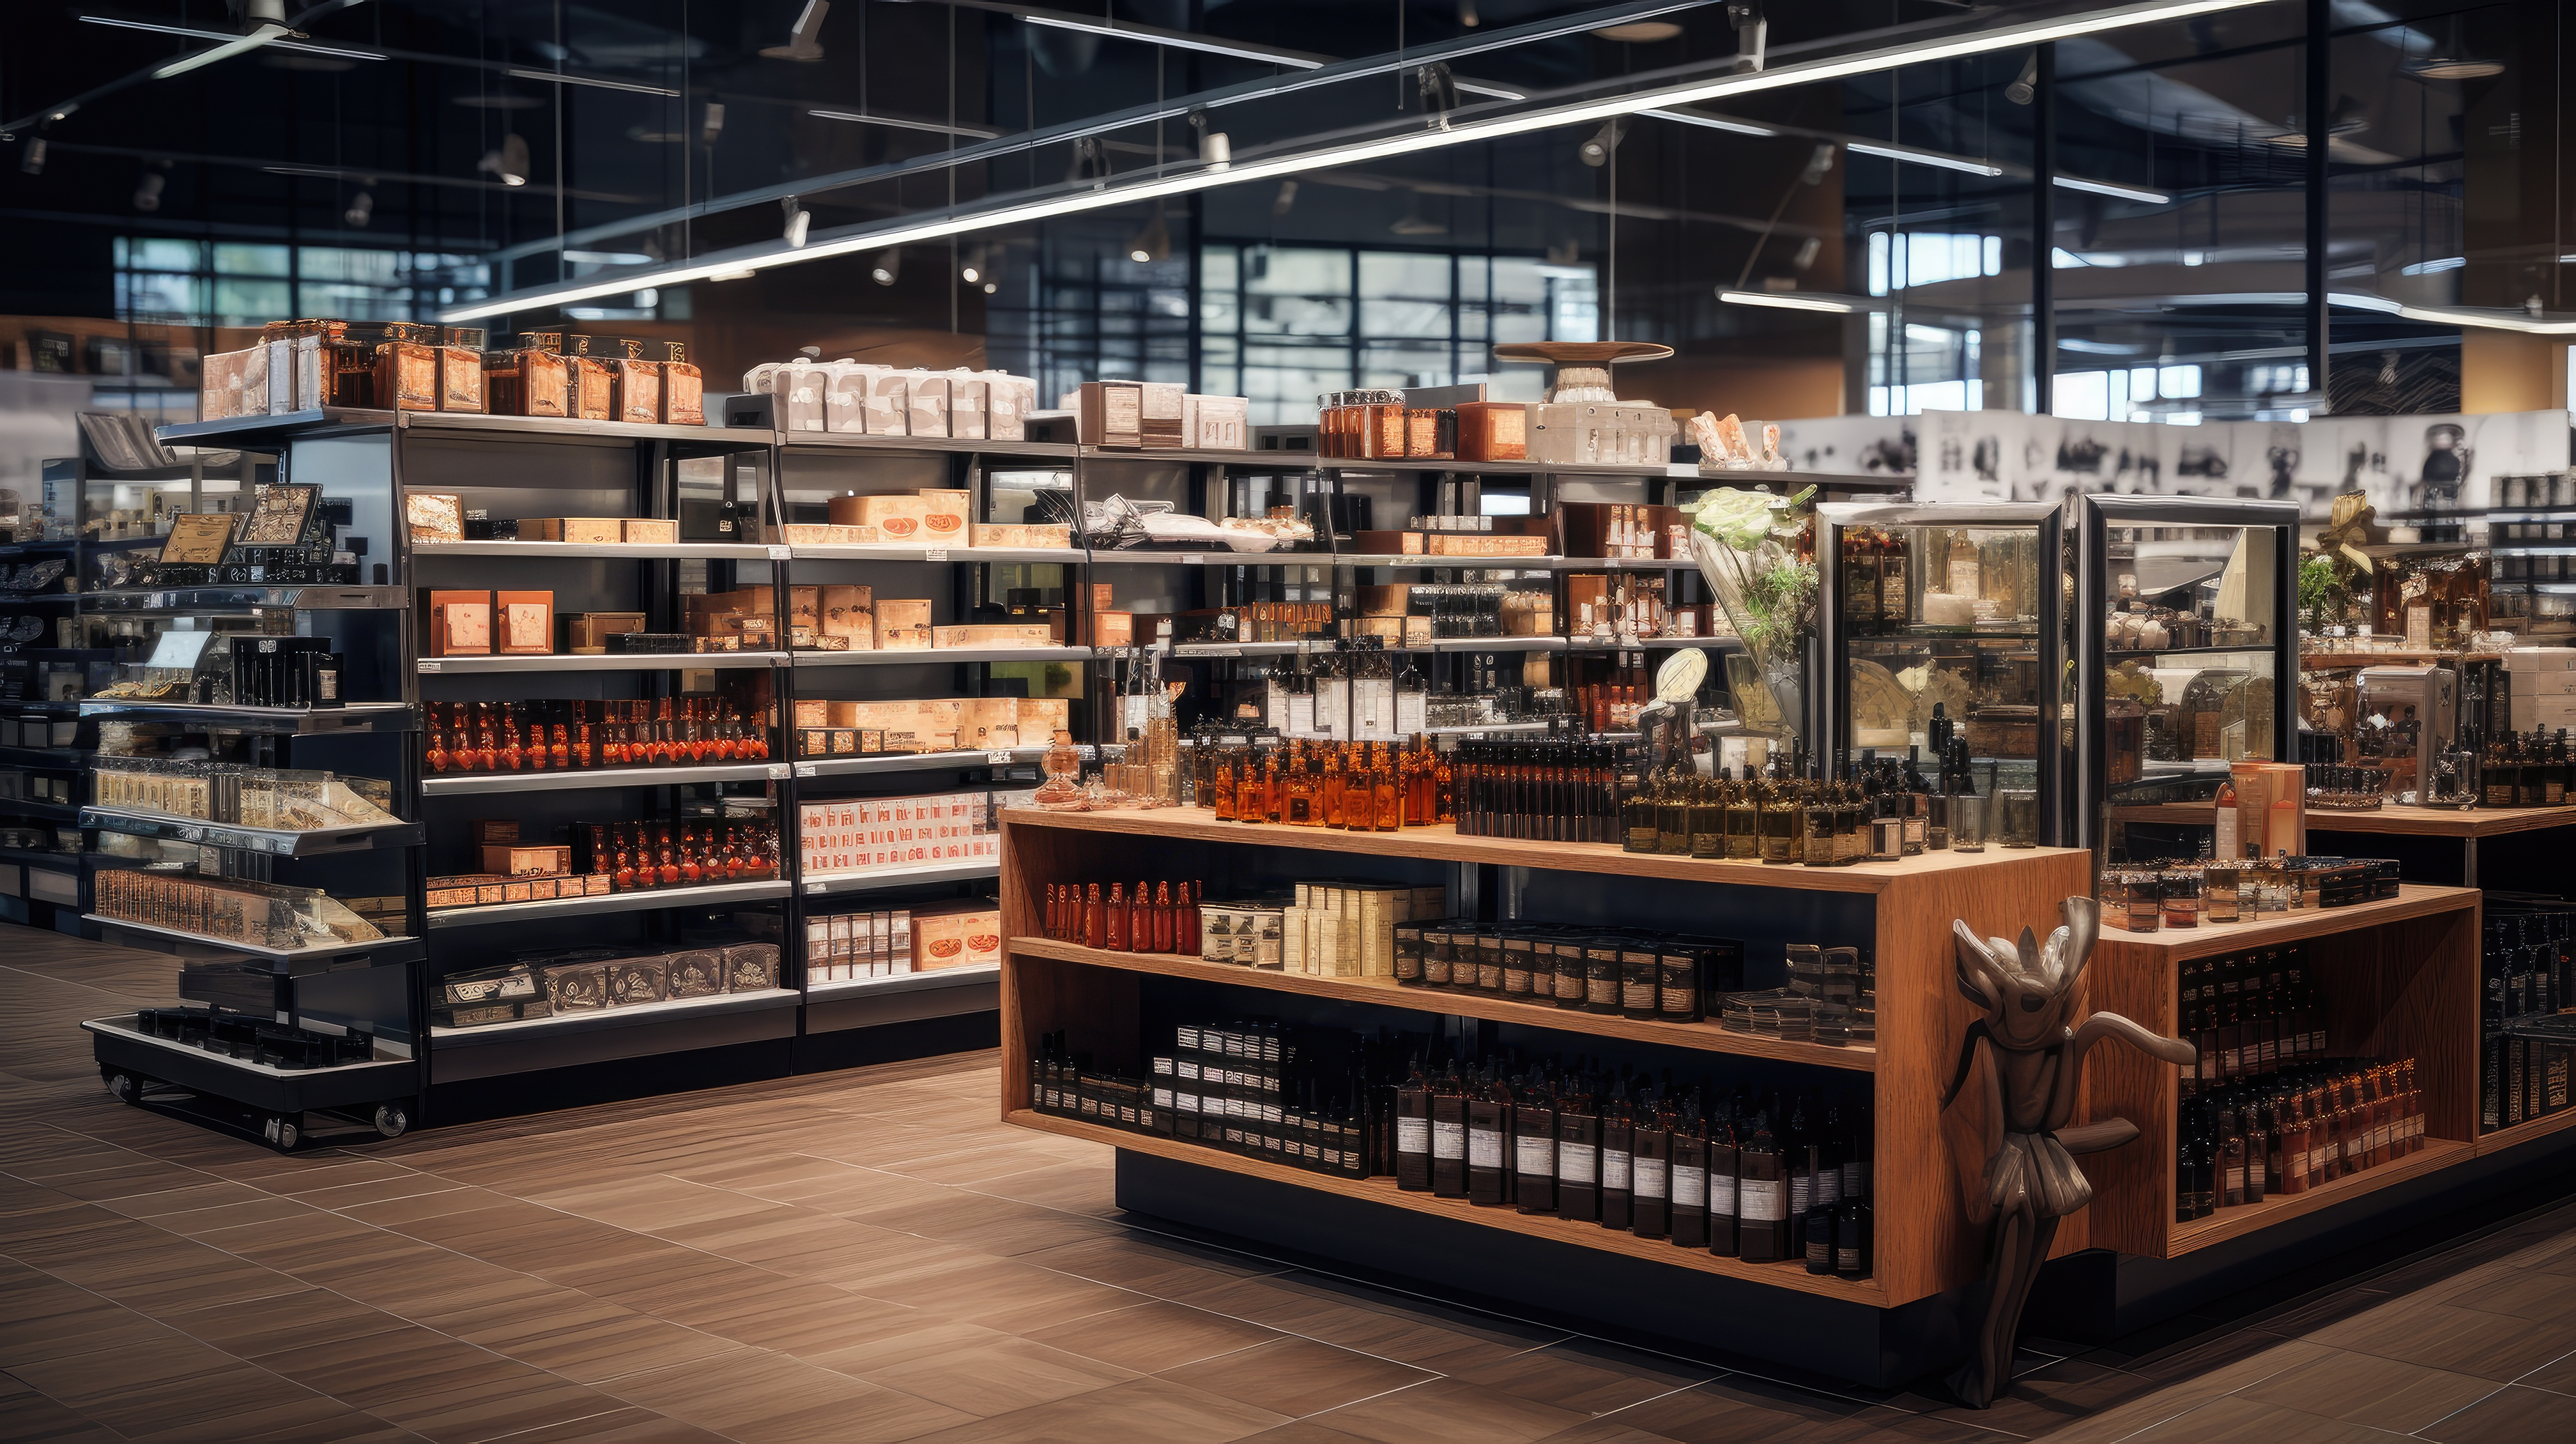 Calling all Foodies… International Gourmet Retail Opportunity in 